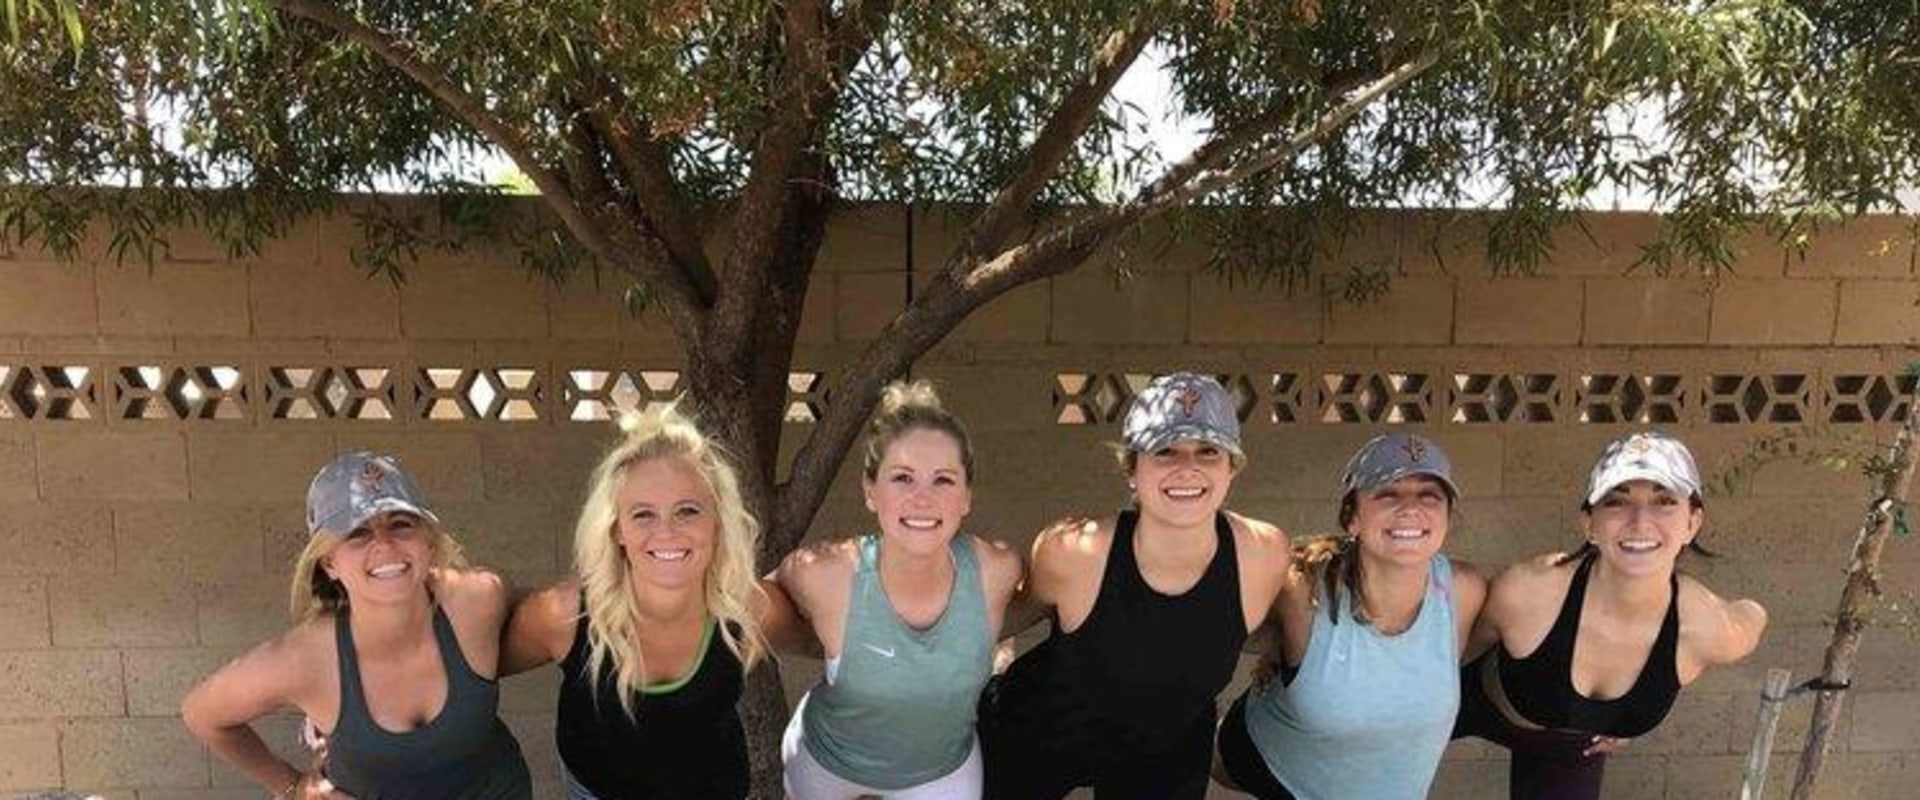 Discounts and Deals for Seniors and Students at Yoga Studios in Scottsdale, AZ